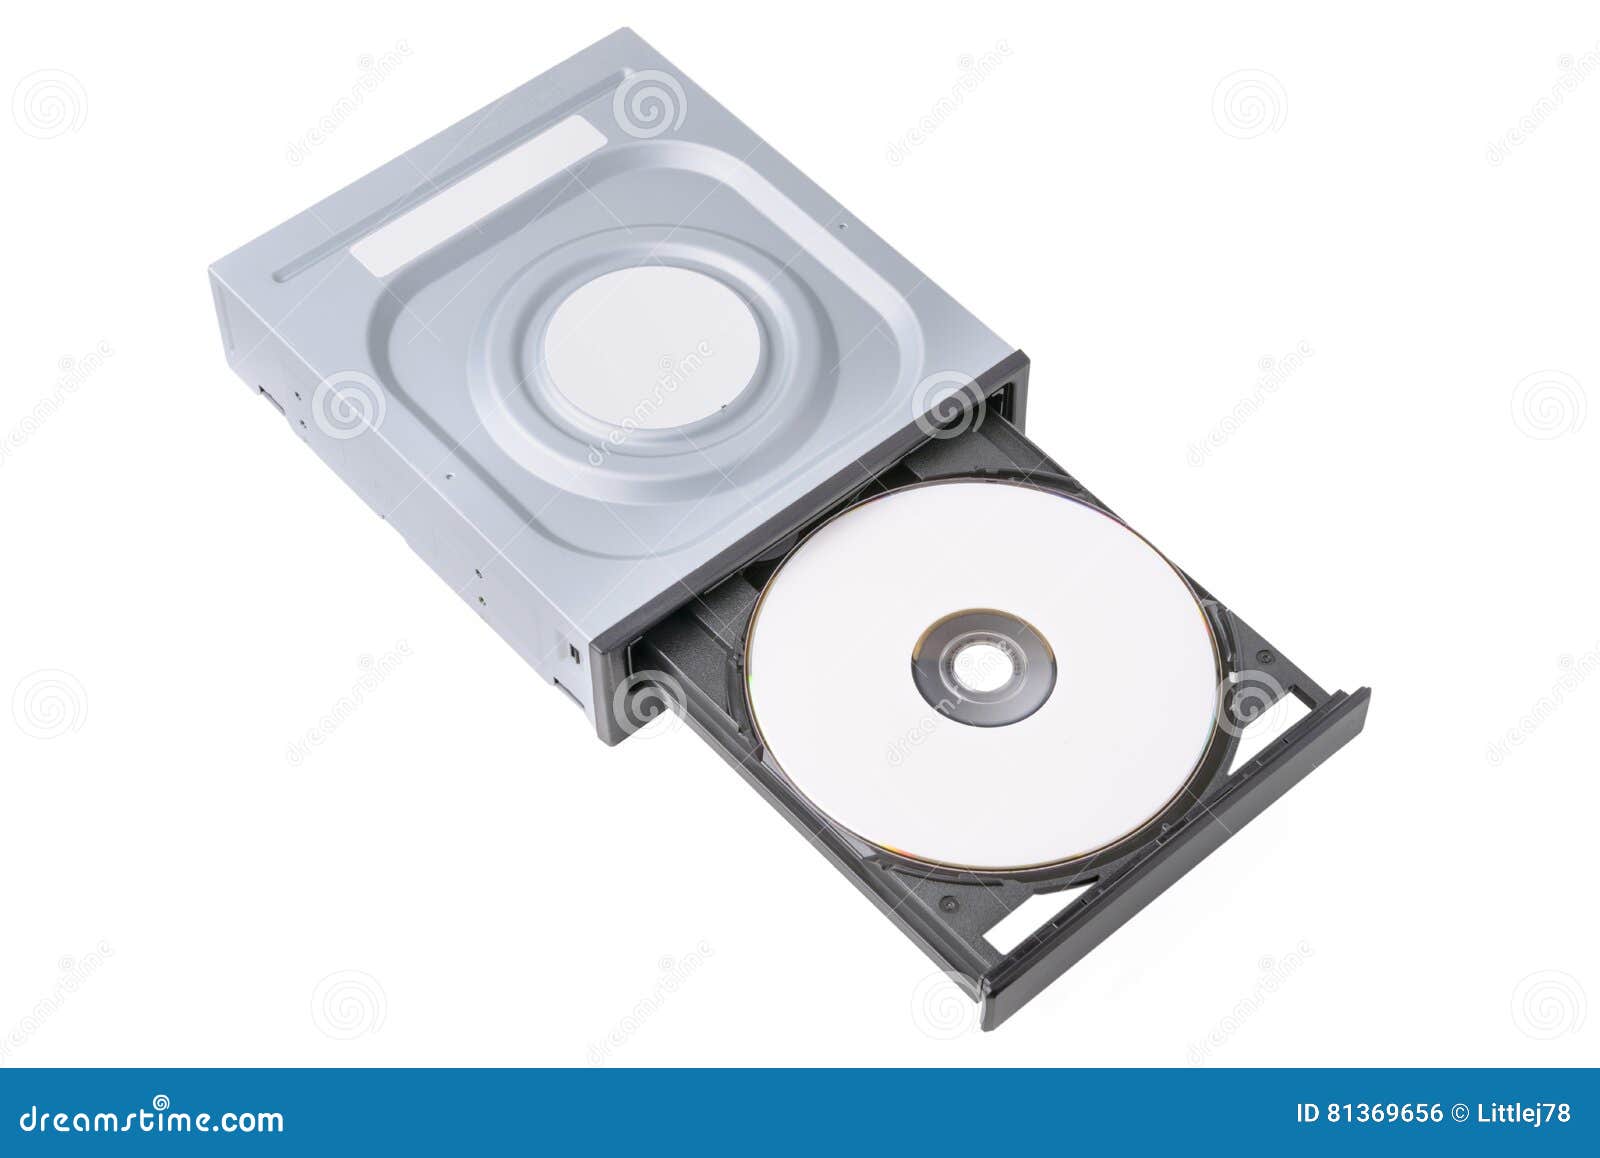 Opened Drive Cd Dvd Blu Ray With A Black Cap And Disk White Background Stock Photo Image Of Mechanism Electronics